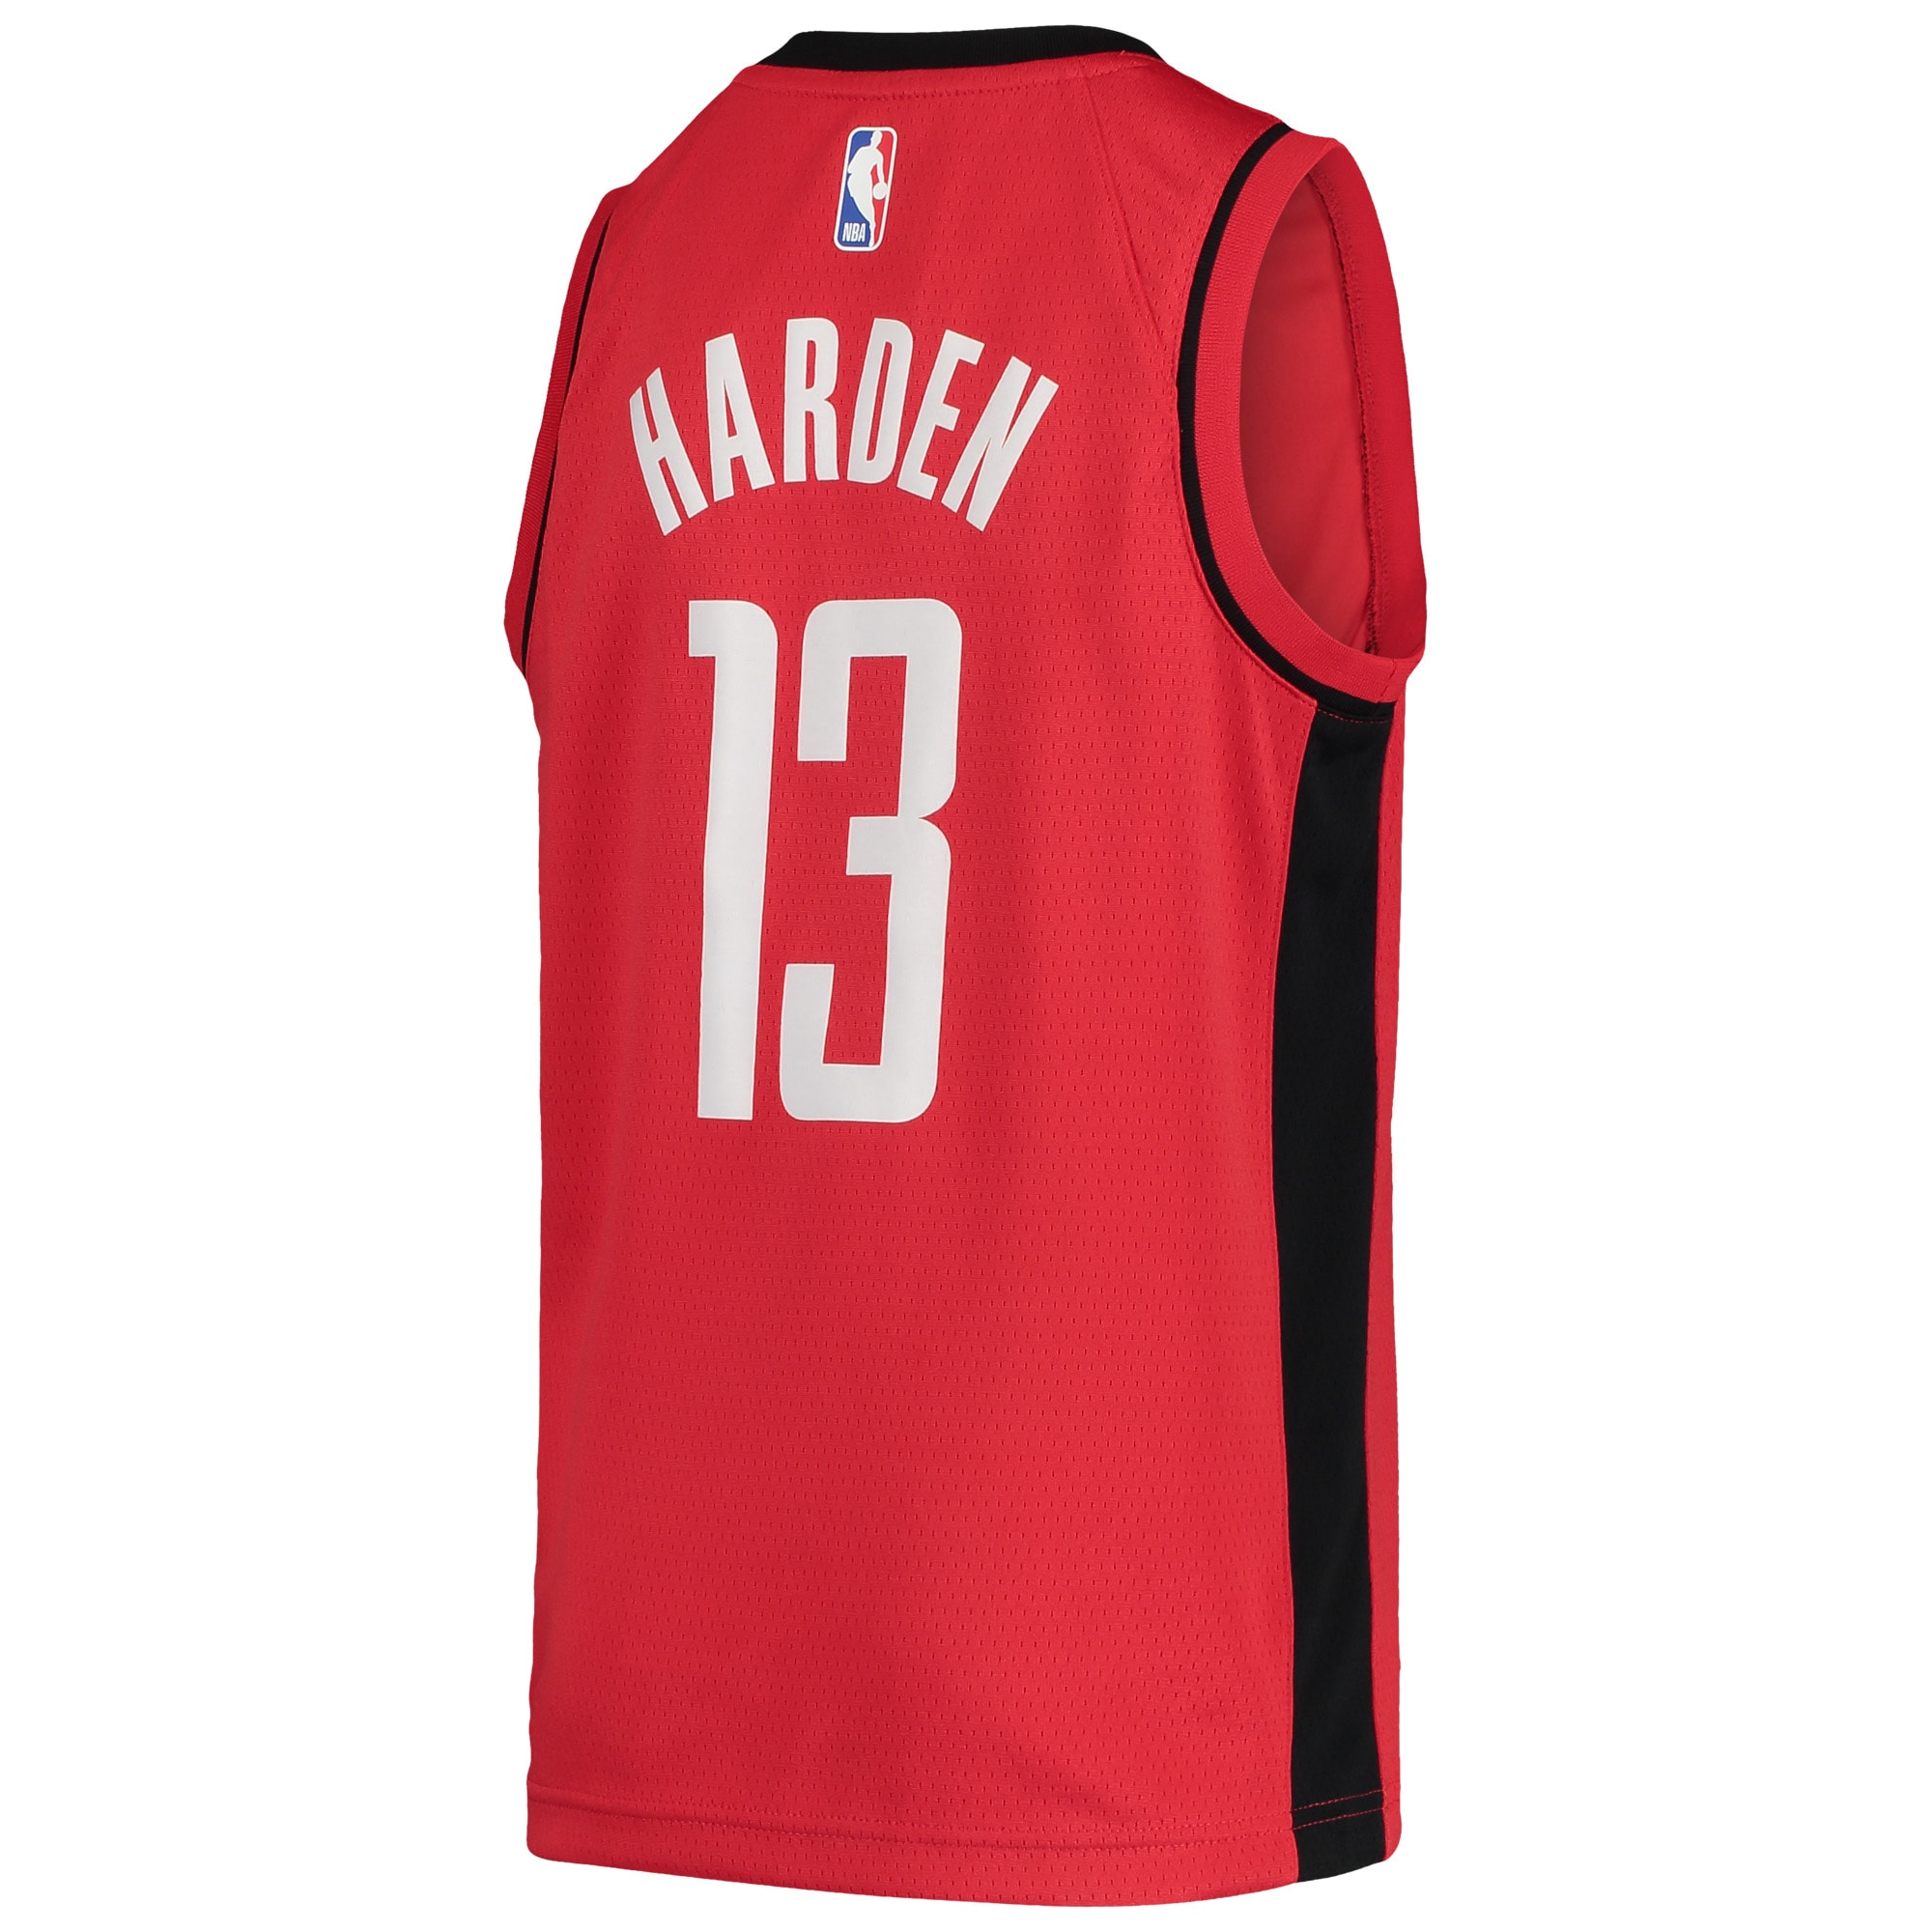 Youth Nike James Harden Red Houston Rockets Team Swingman Jersey - Icon Edition - image 3 of 3